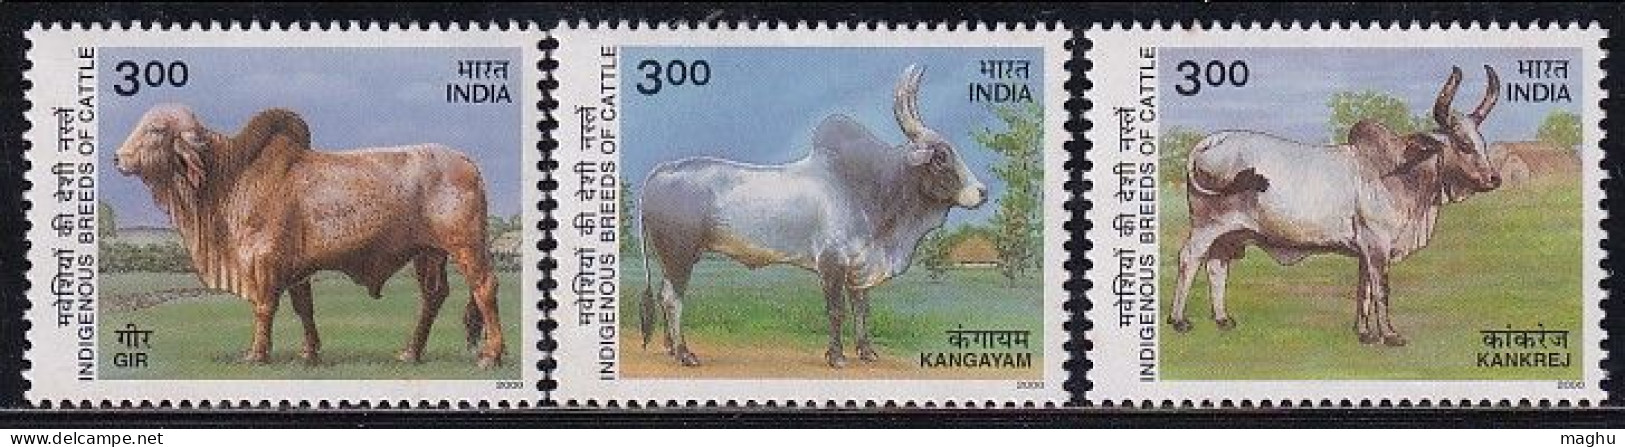 3 Diff., Breeds Of Cattle, India MNH 2000,, Farm Animal, Cow, Cond., Margnal Stains - Unused Stamps